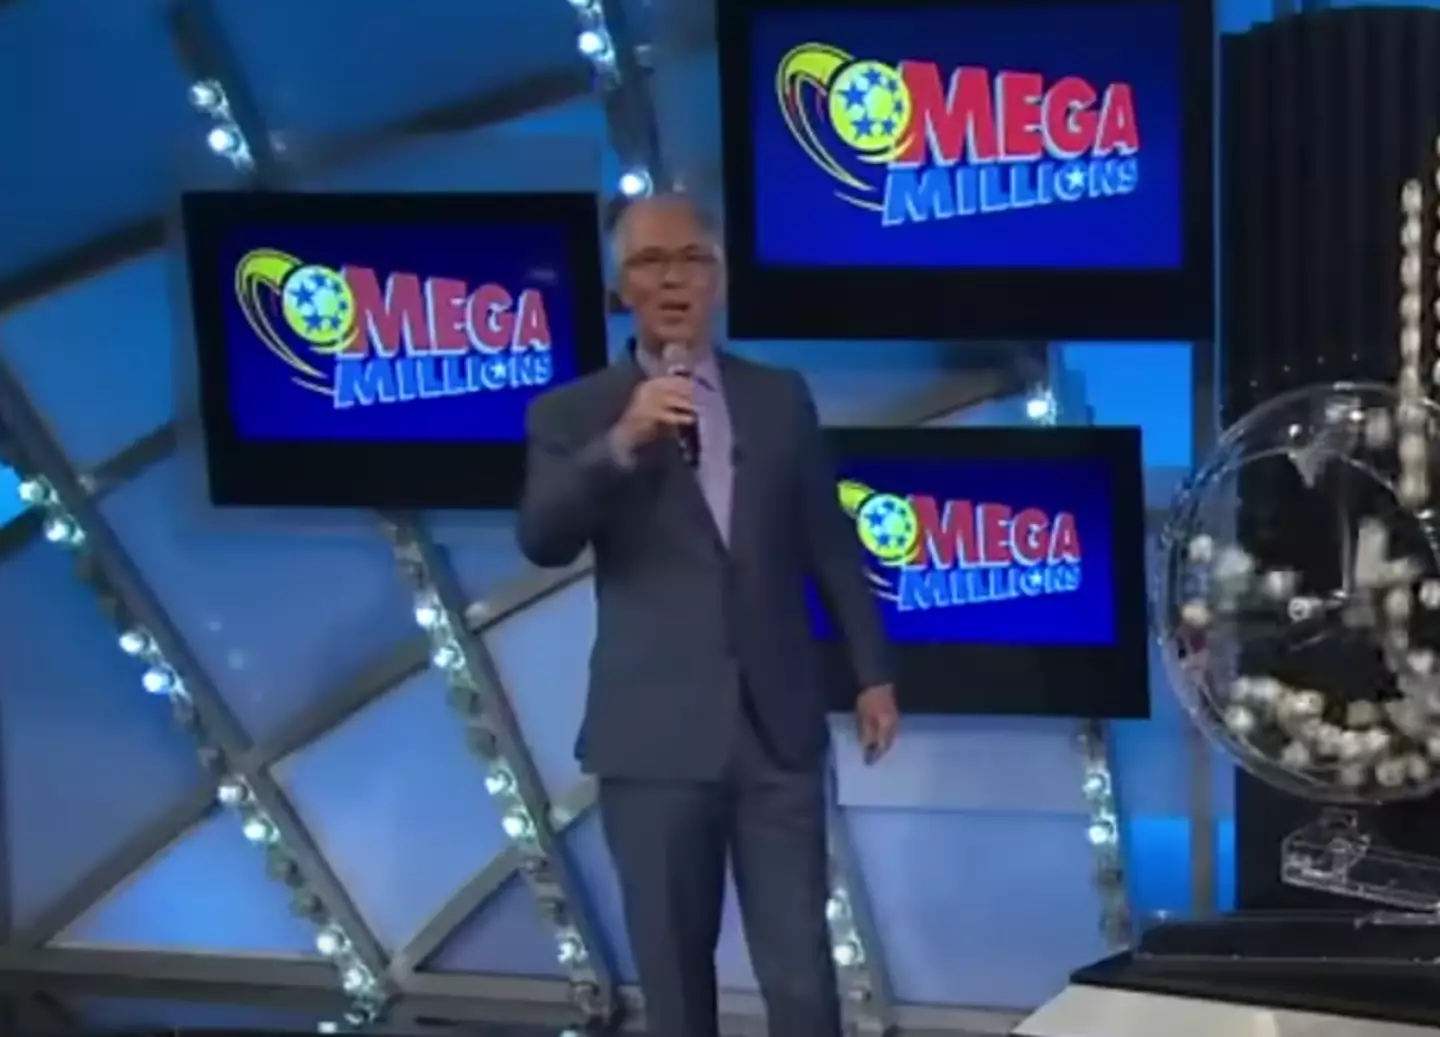 The Mega Millions drawing took place yesterday.